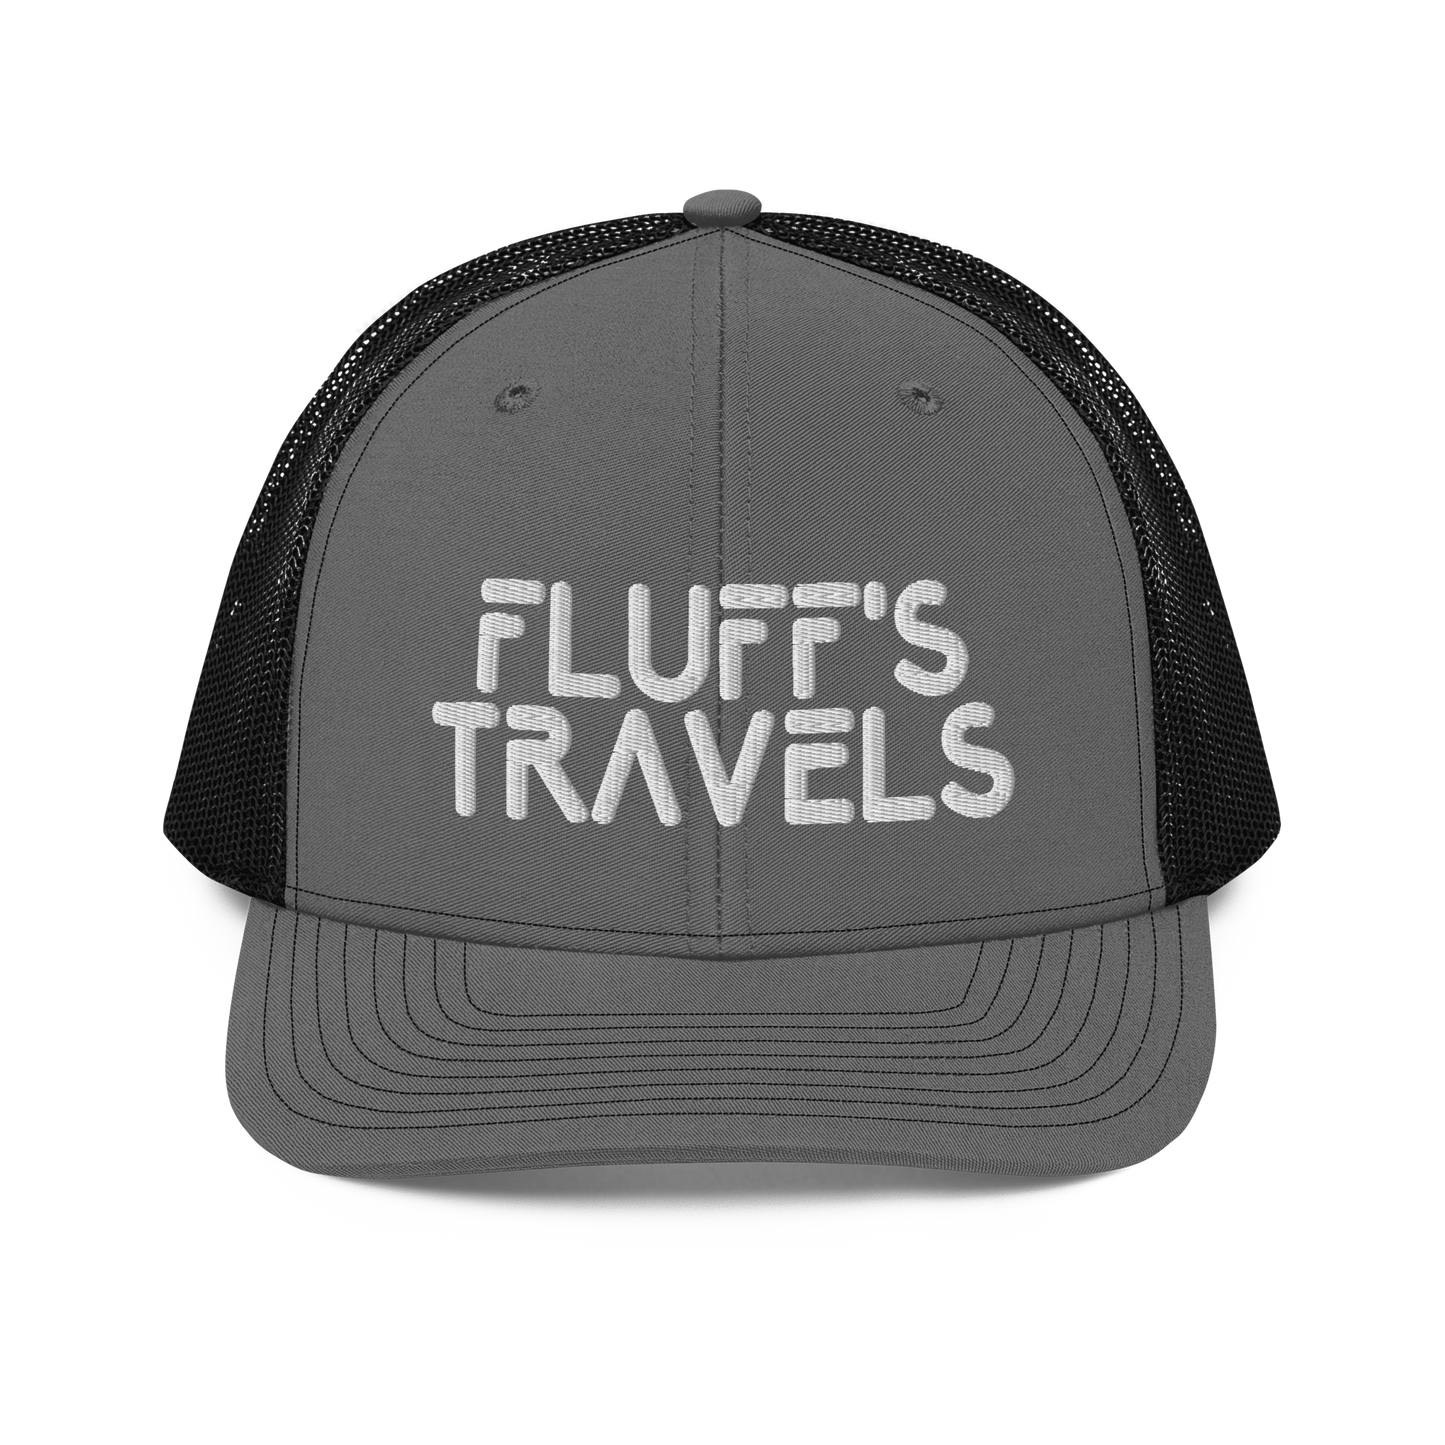 Fluffs Travels Embroidery 112 Snapback Cap